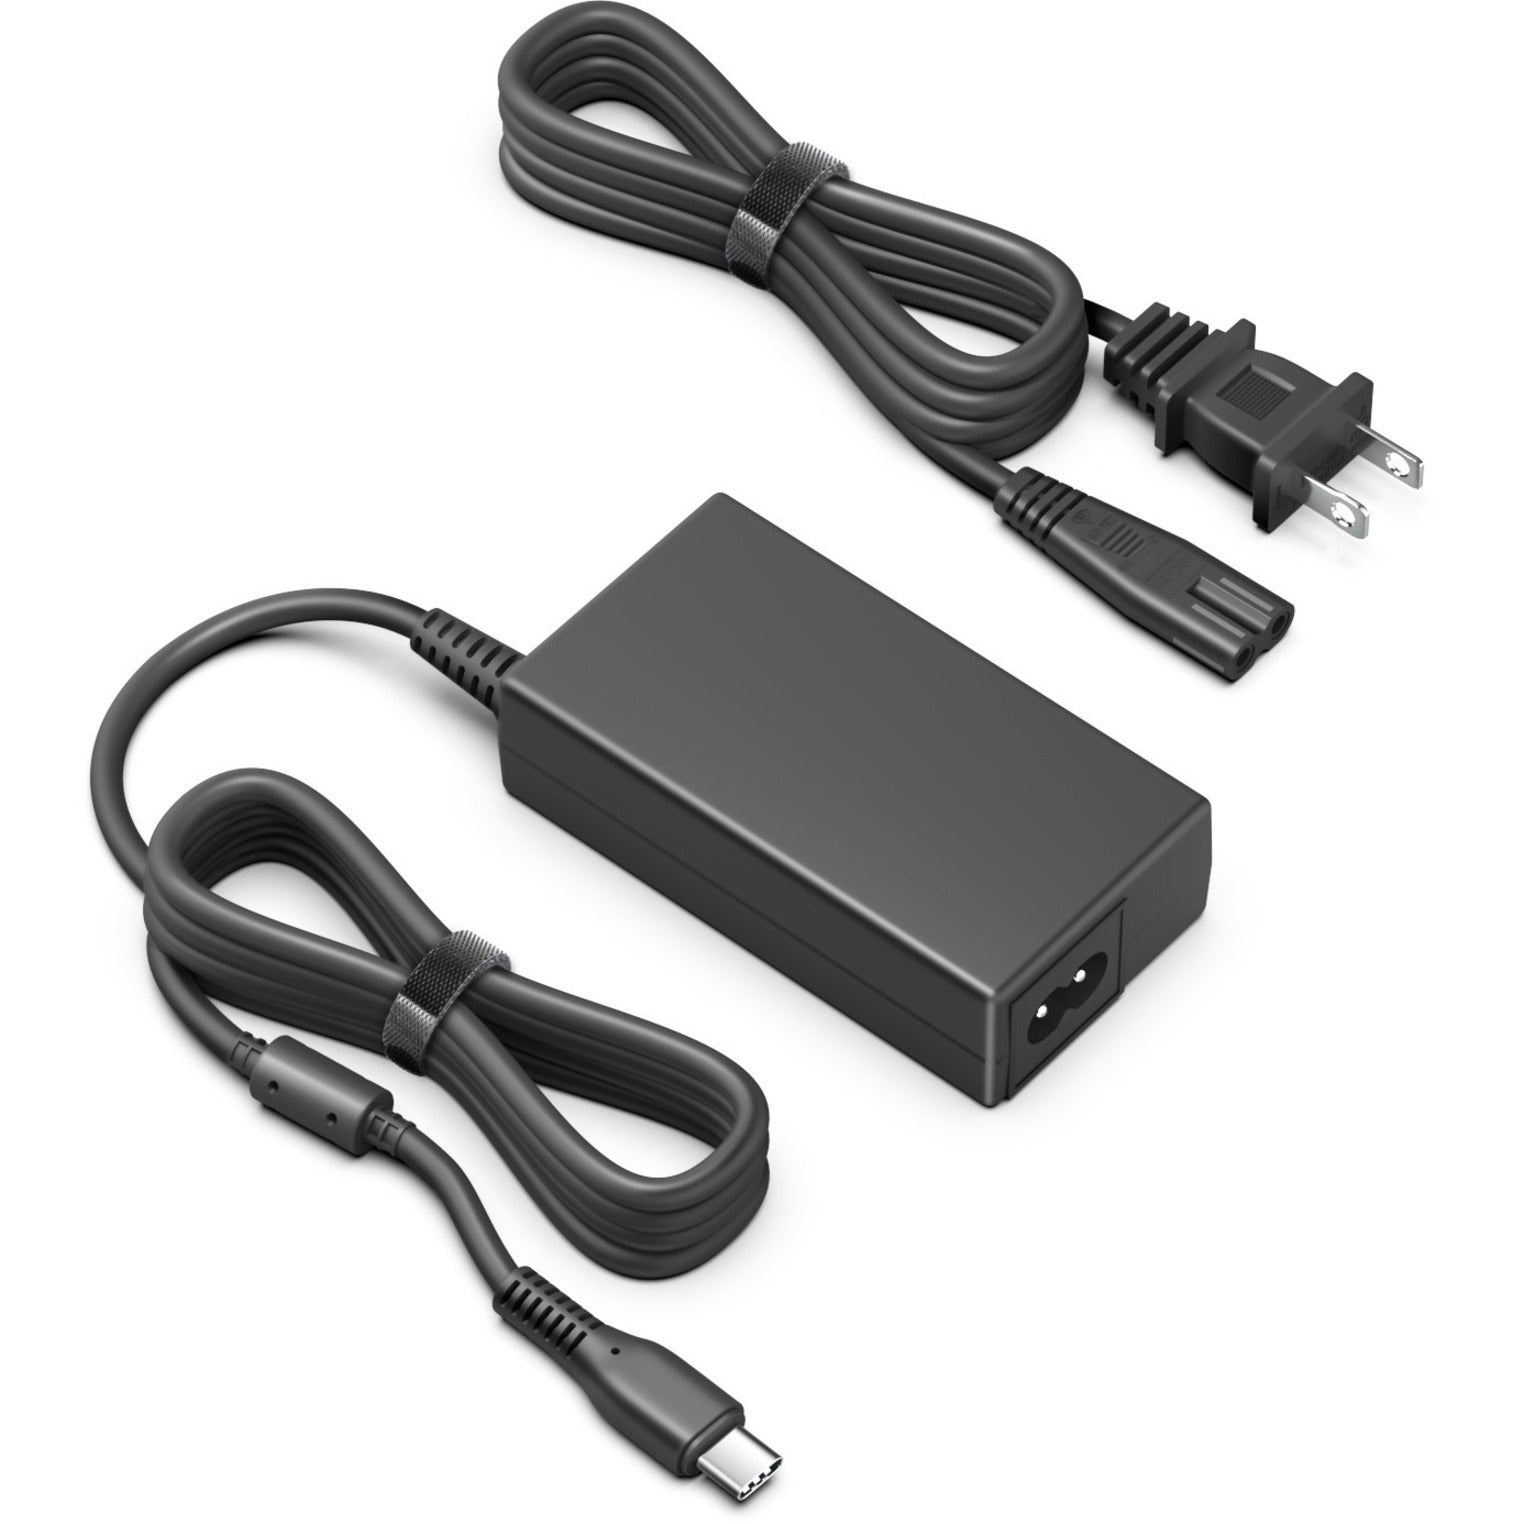 BTI AC Adapter, 65W Output Voltage, USB Type C Device Compatibility